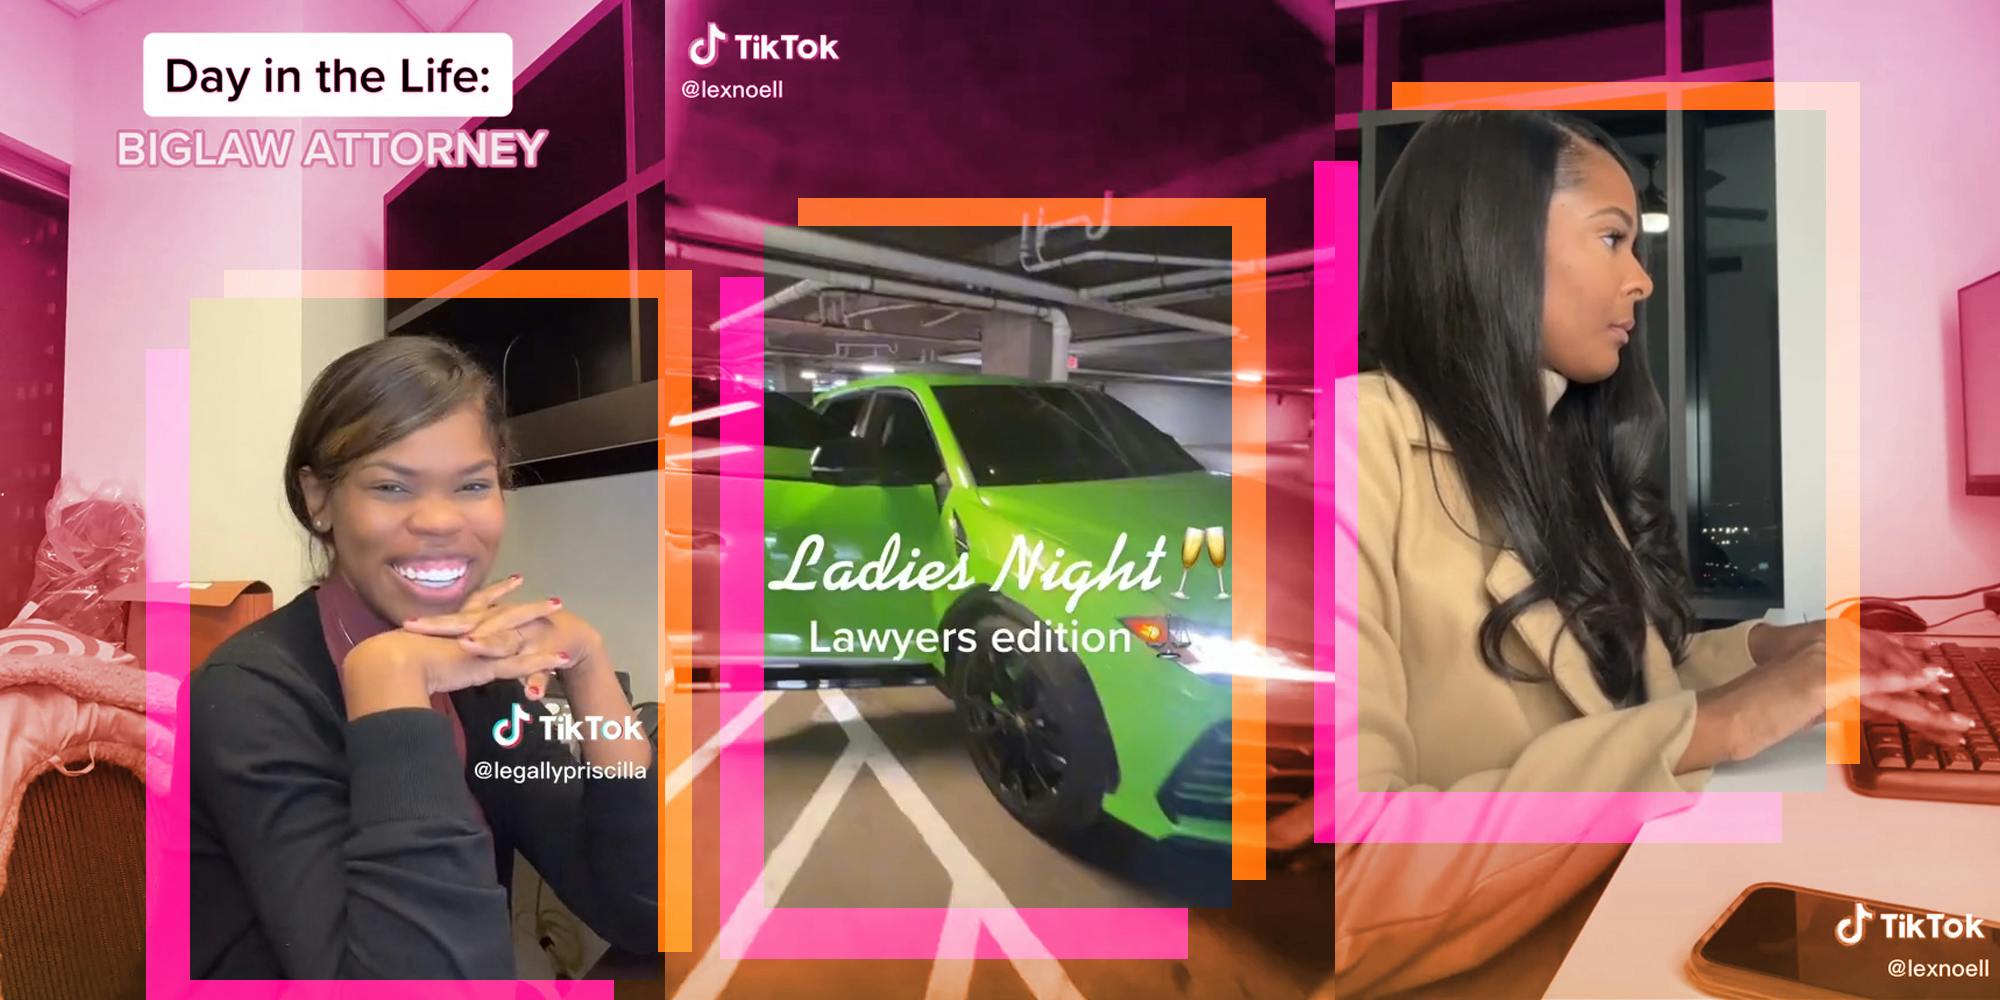 Luxury, lifestyle, and law: Black women lawyers are flaunting their success on TikTok to inspire others